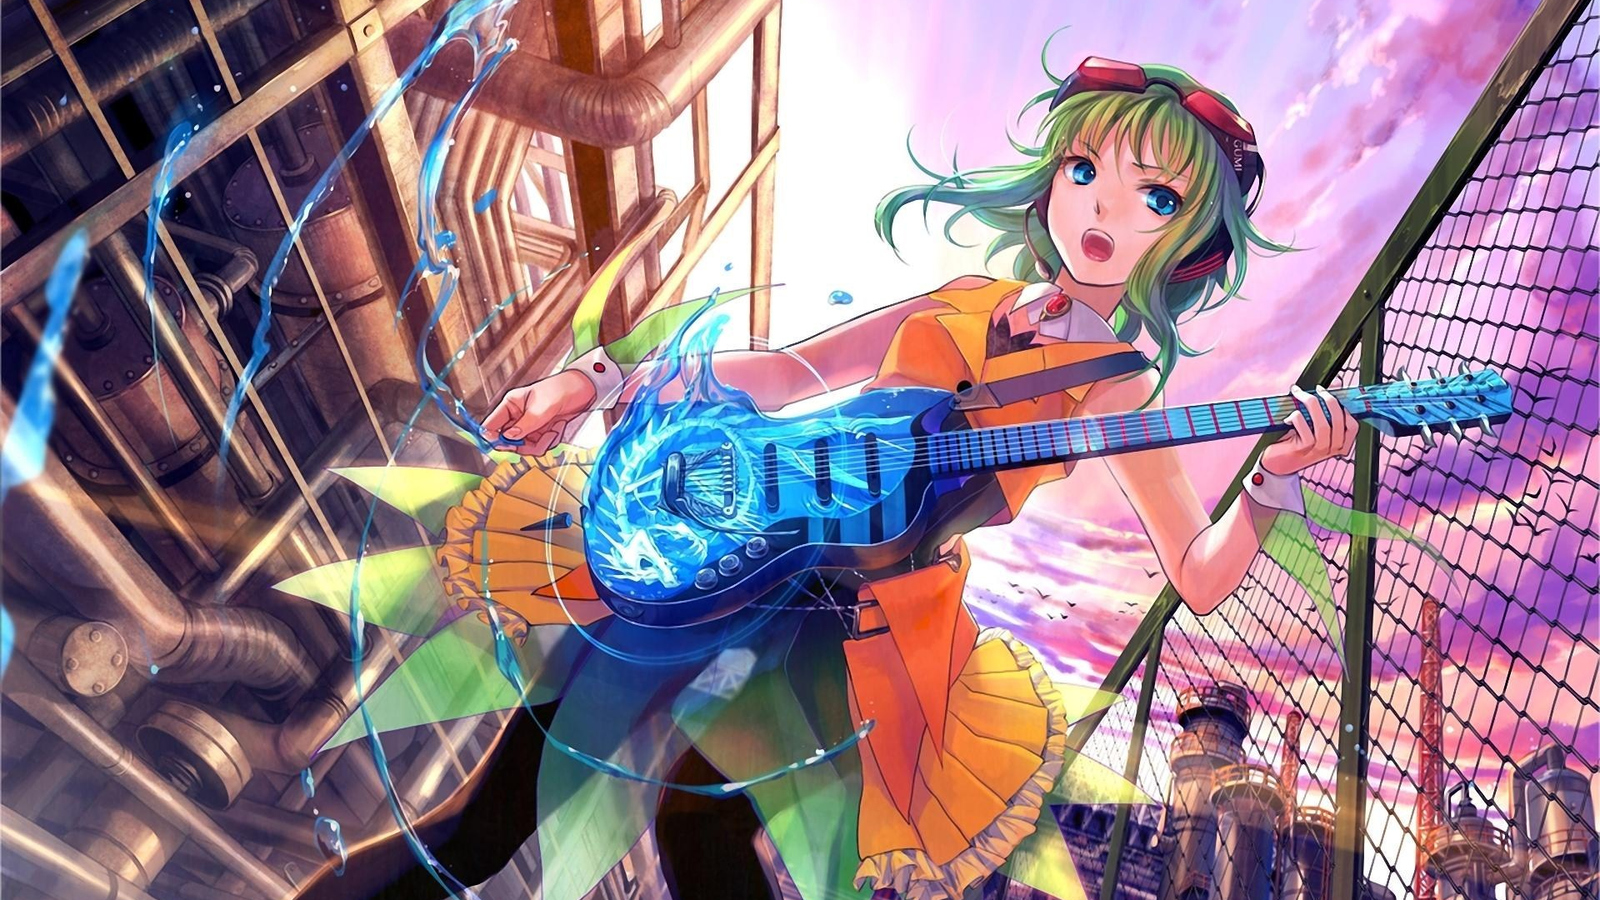 Wallpaper ccrgaoooo, art, c.c.r, nature, smile, anime, girl, guitar, the  sky, vocaloid, clouds, sunset images for desktop, section сёдзё - download